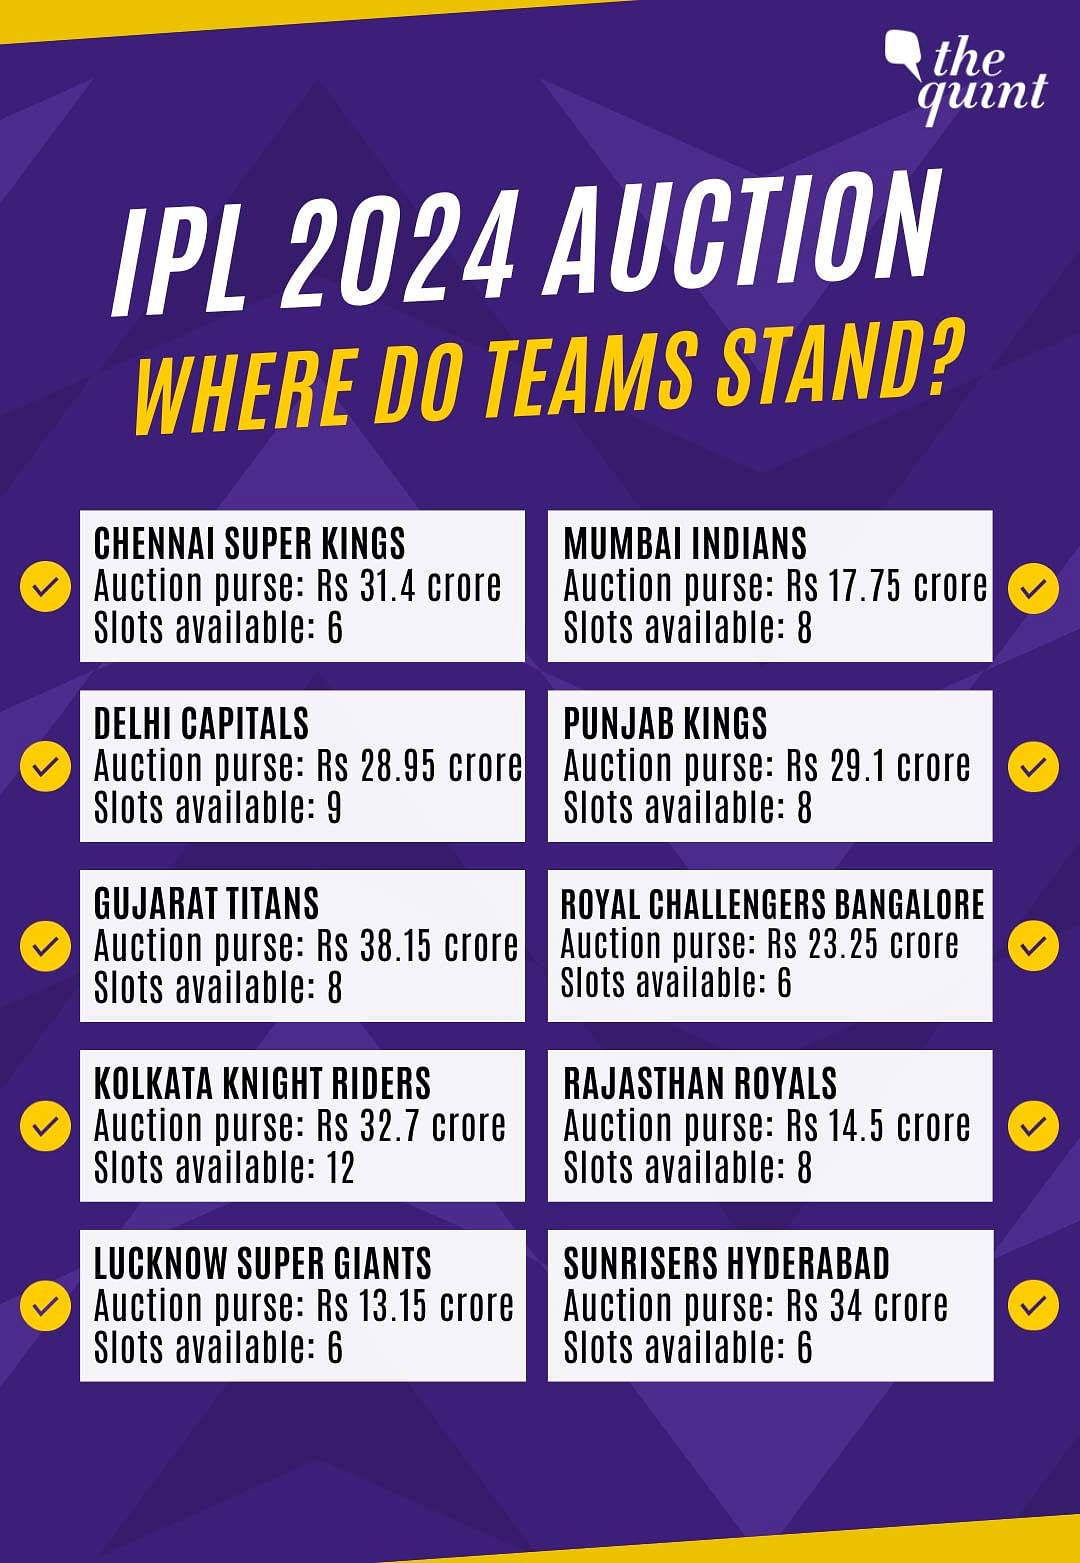 Hardik Pandya is returning to Mumbai, but where does that leave Gujarat and Bangalore ahead of the IPL 2024 auction?